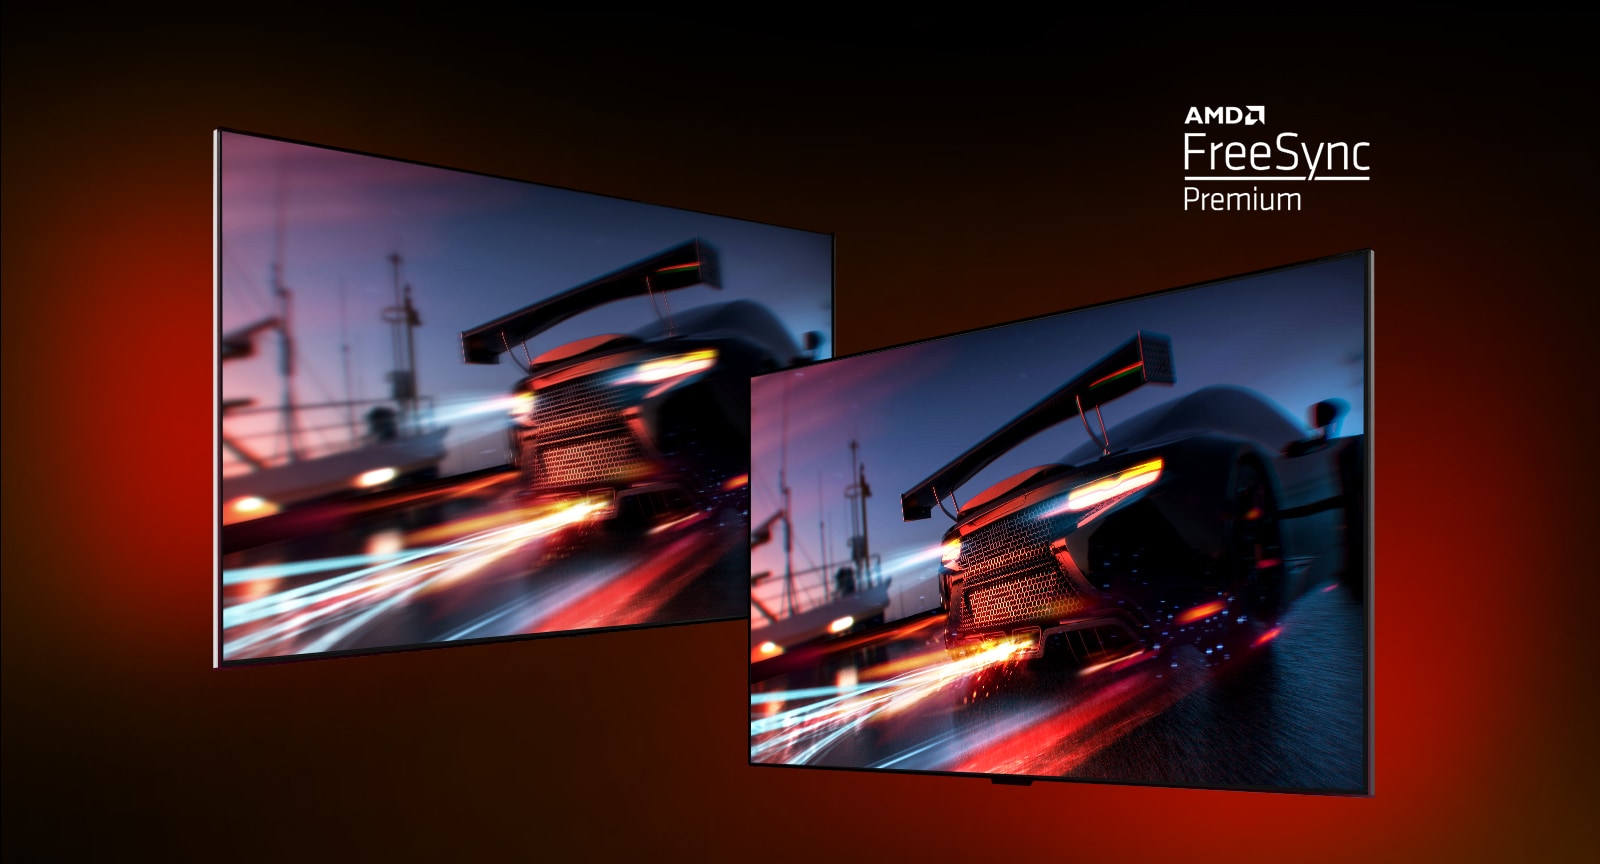 There are two TVs – on the left shows a car racing game scene with a racing car. On the right also shows the same game scene but in a brighter and clearer picture display. On right top corner shows AMD FreeSync premium logo.  